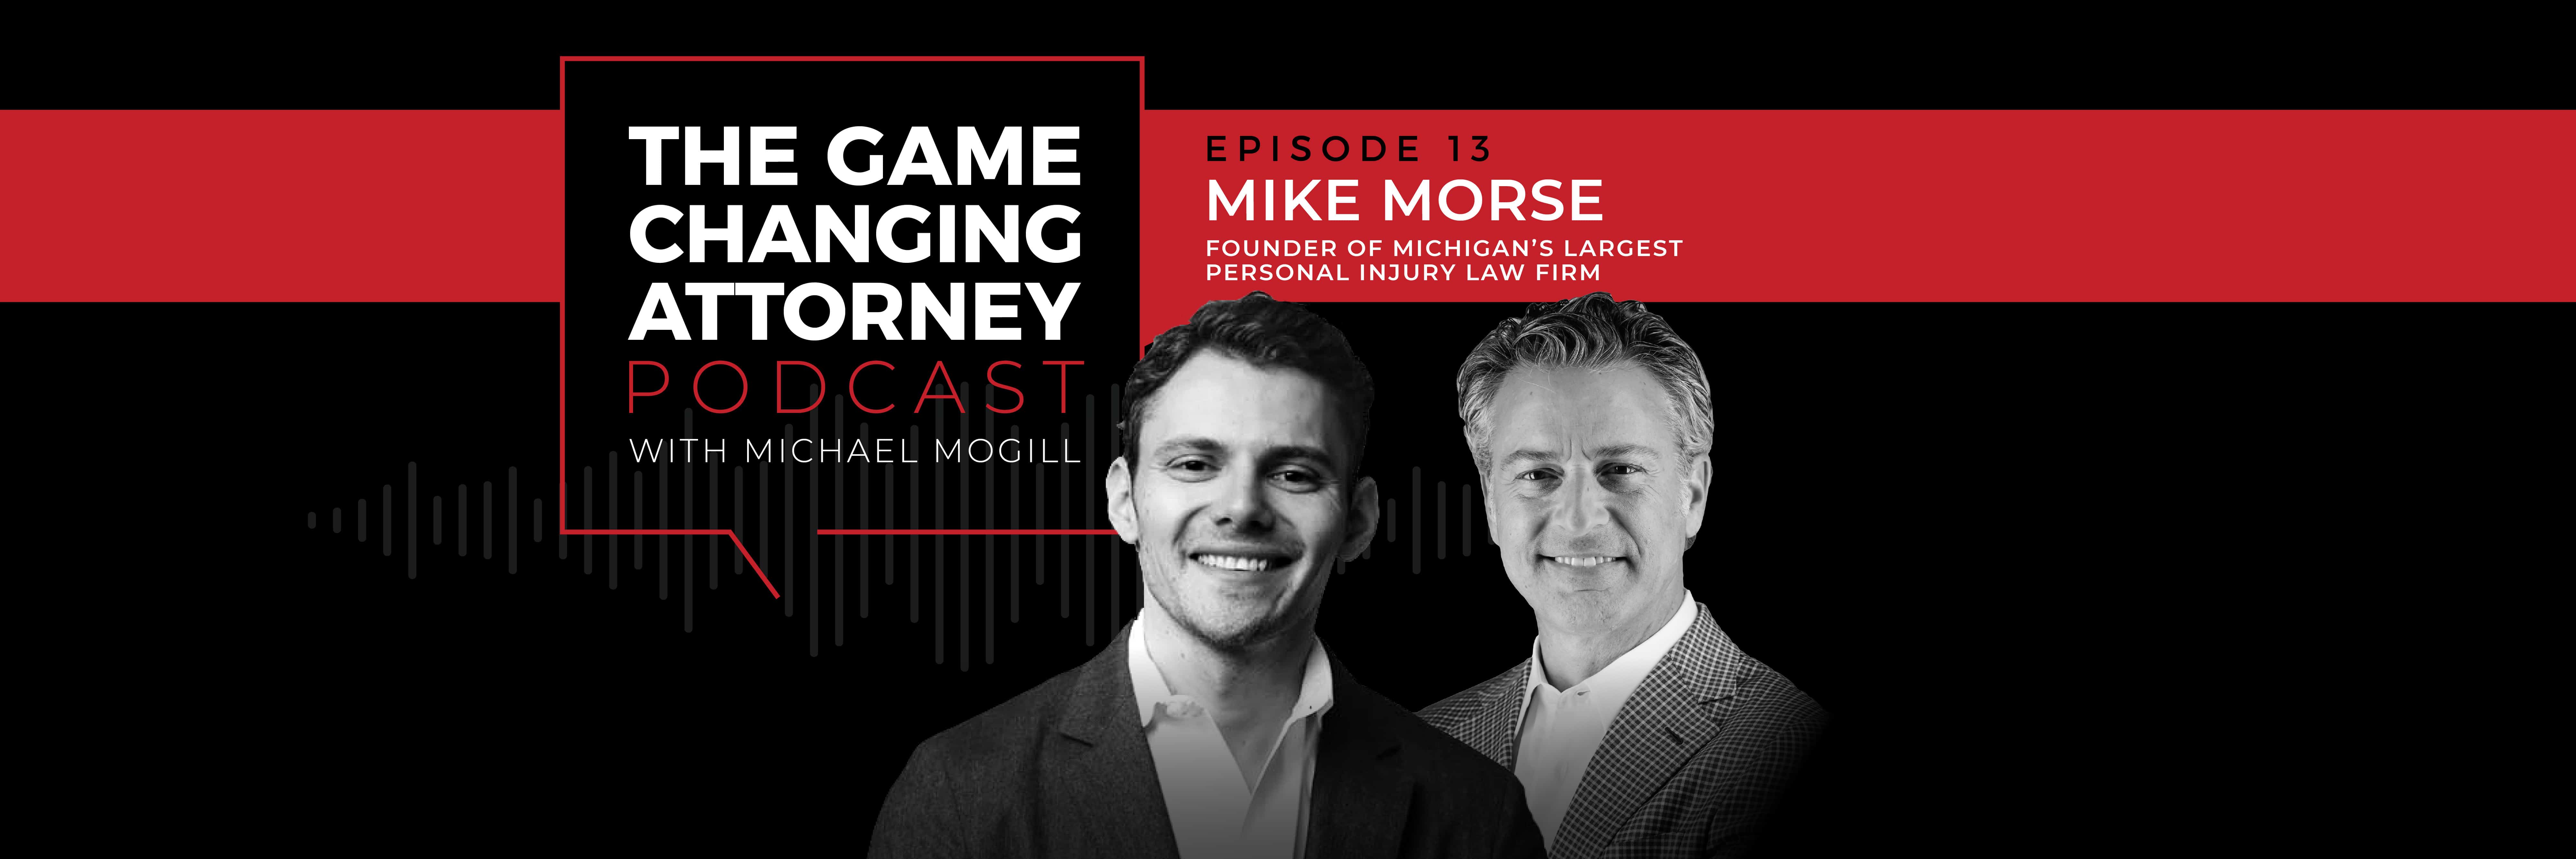 Mike Morse - The Game Changing Attorney Podcast - Desktop